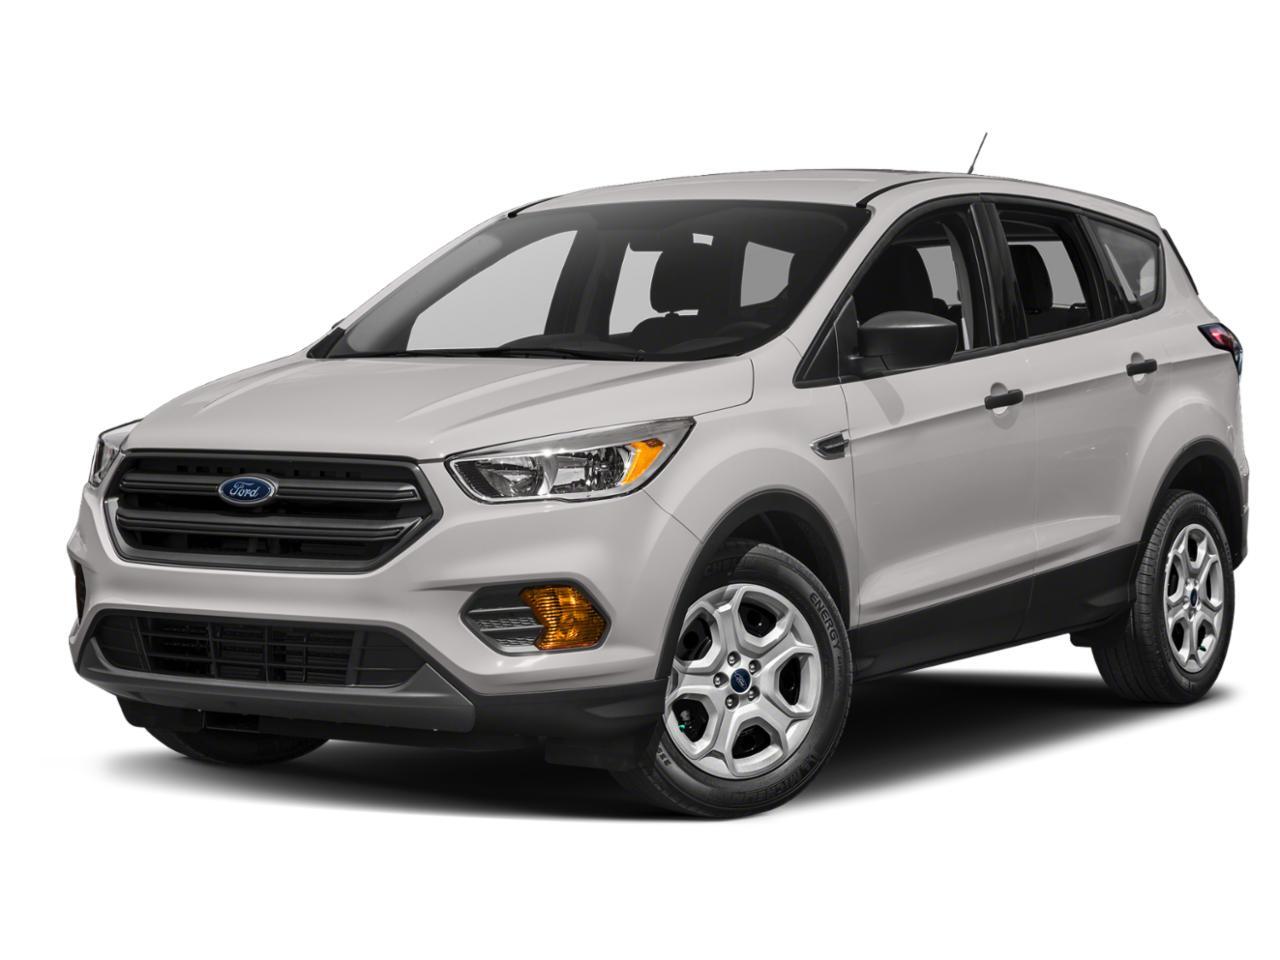 2018 Ford Escape SEL 4WD| KEYLESS ENRTY| BACKUP CAM| HEATED SEATS